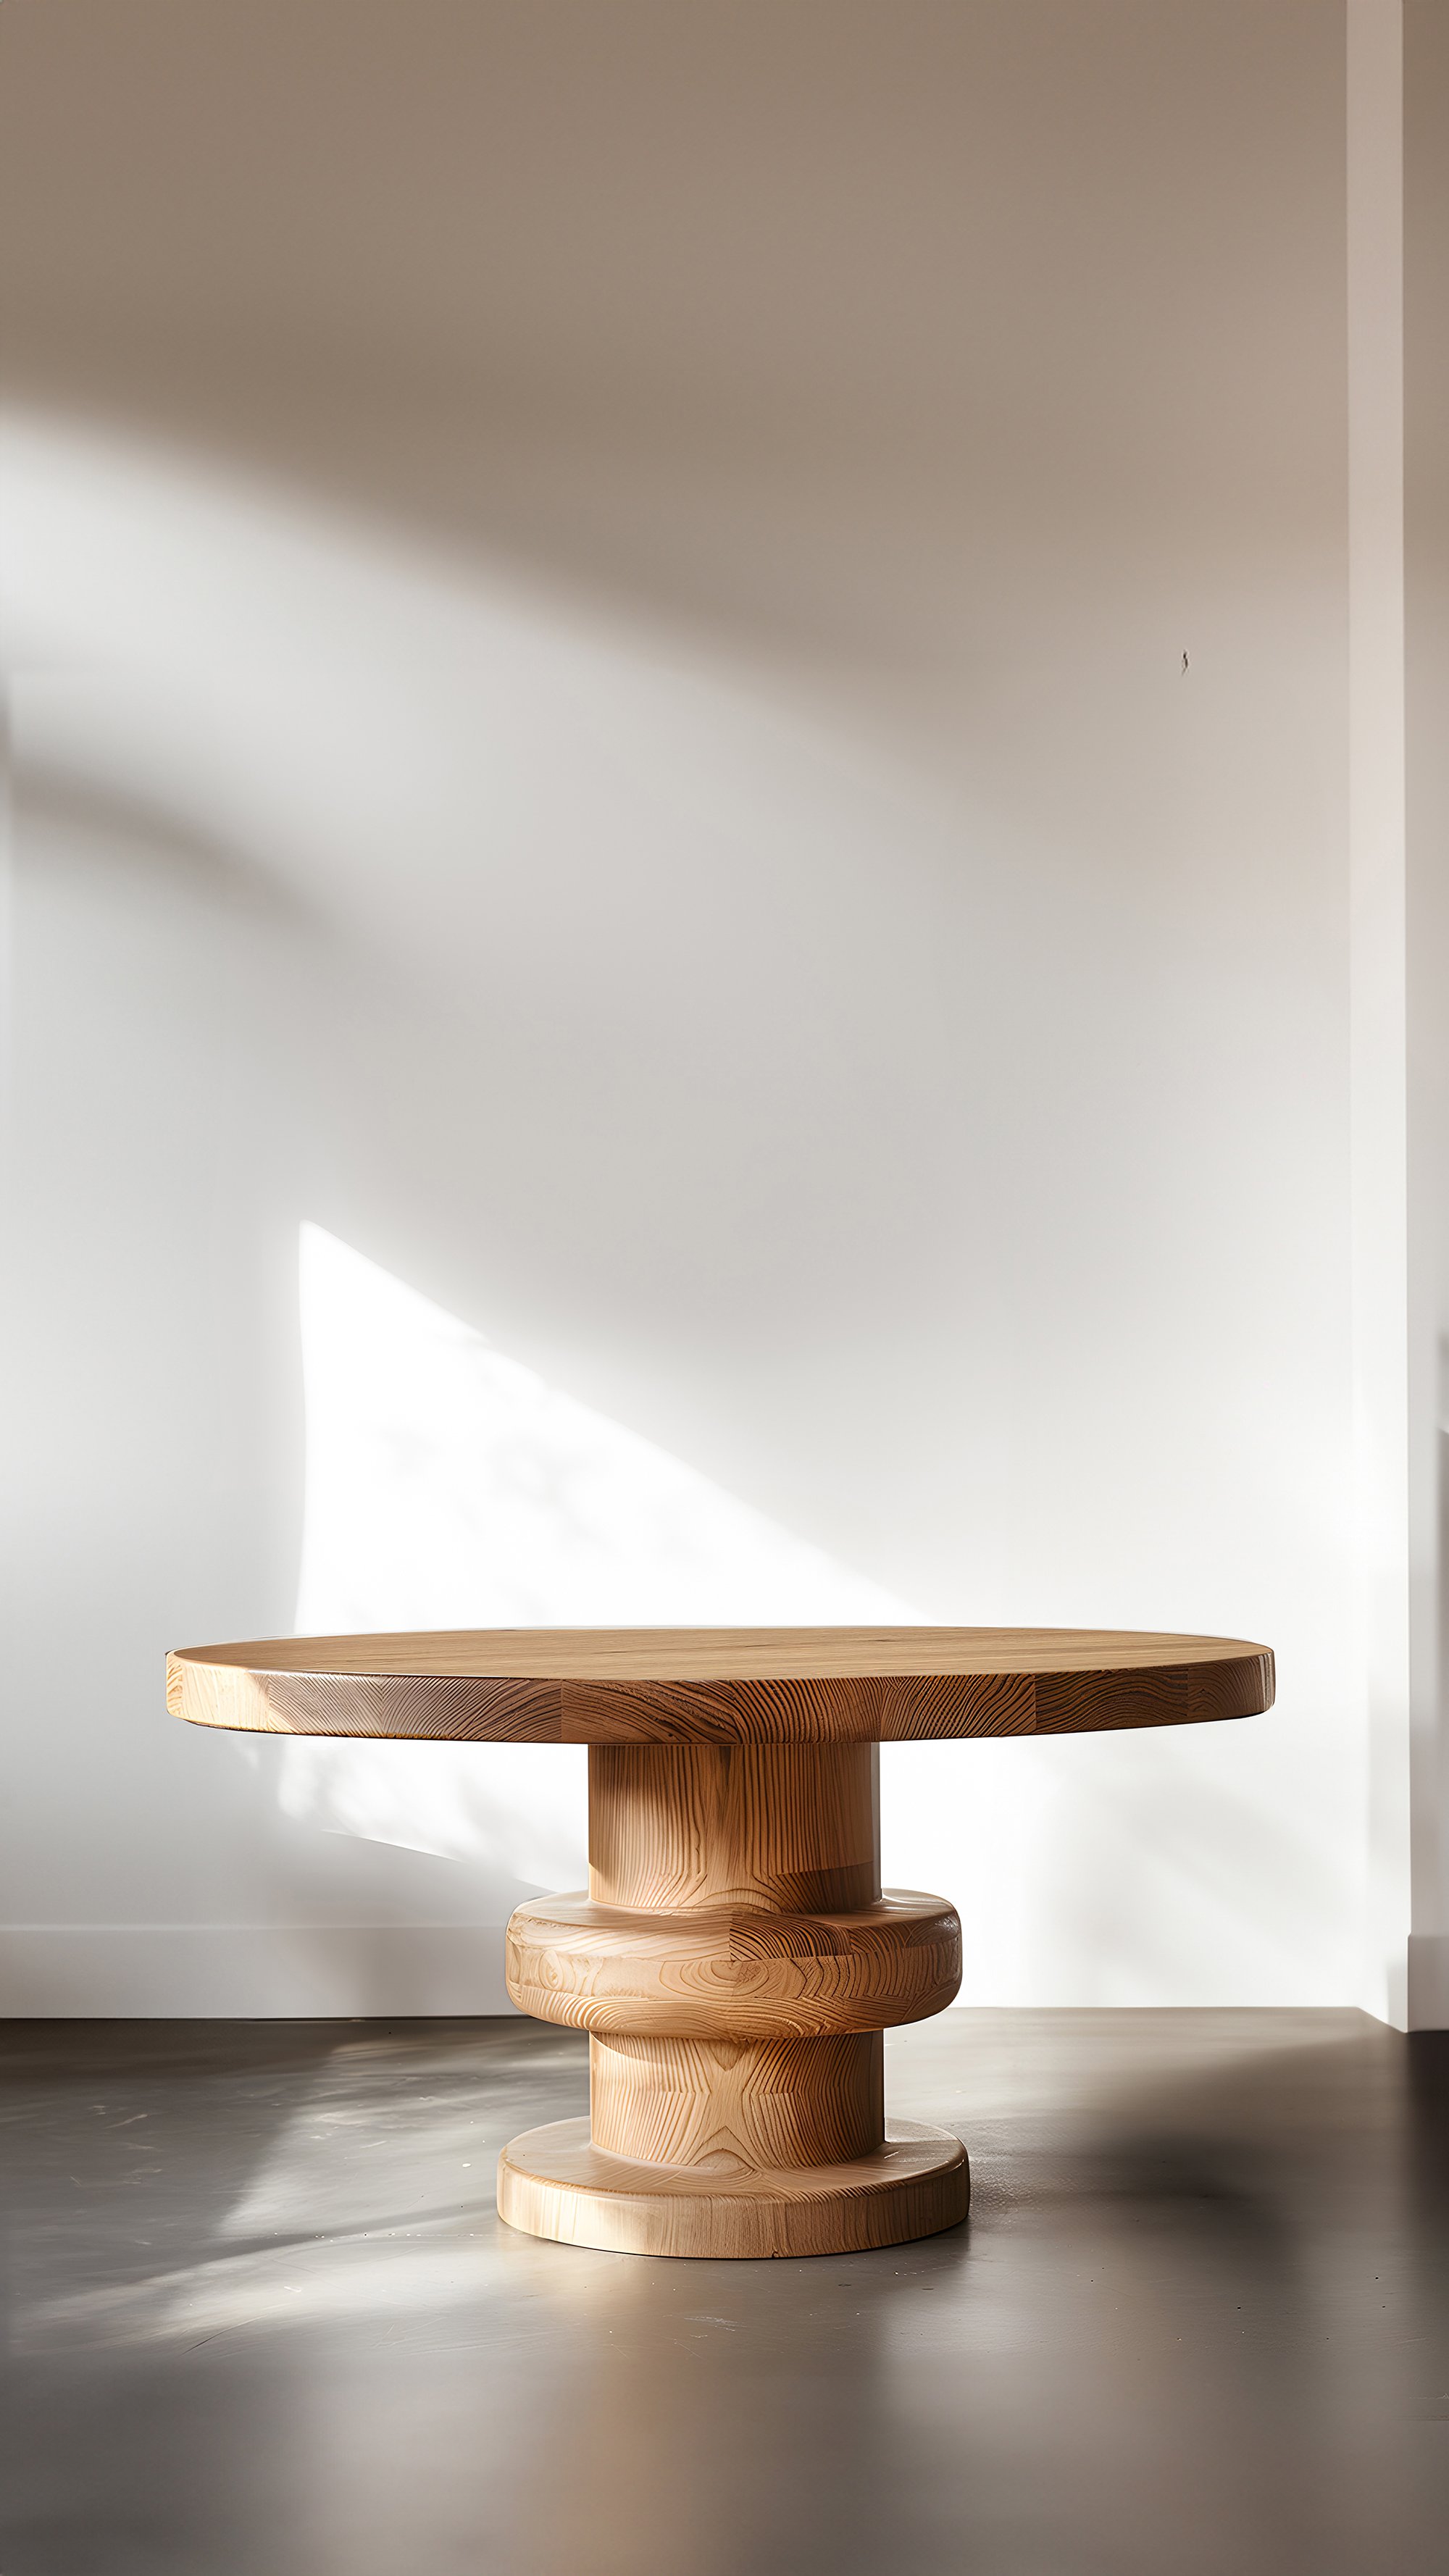 Dining Elegance No06, Socle Dining Room Tables, Crafted by NONO - 5.jpg